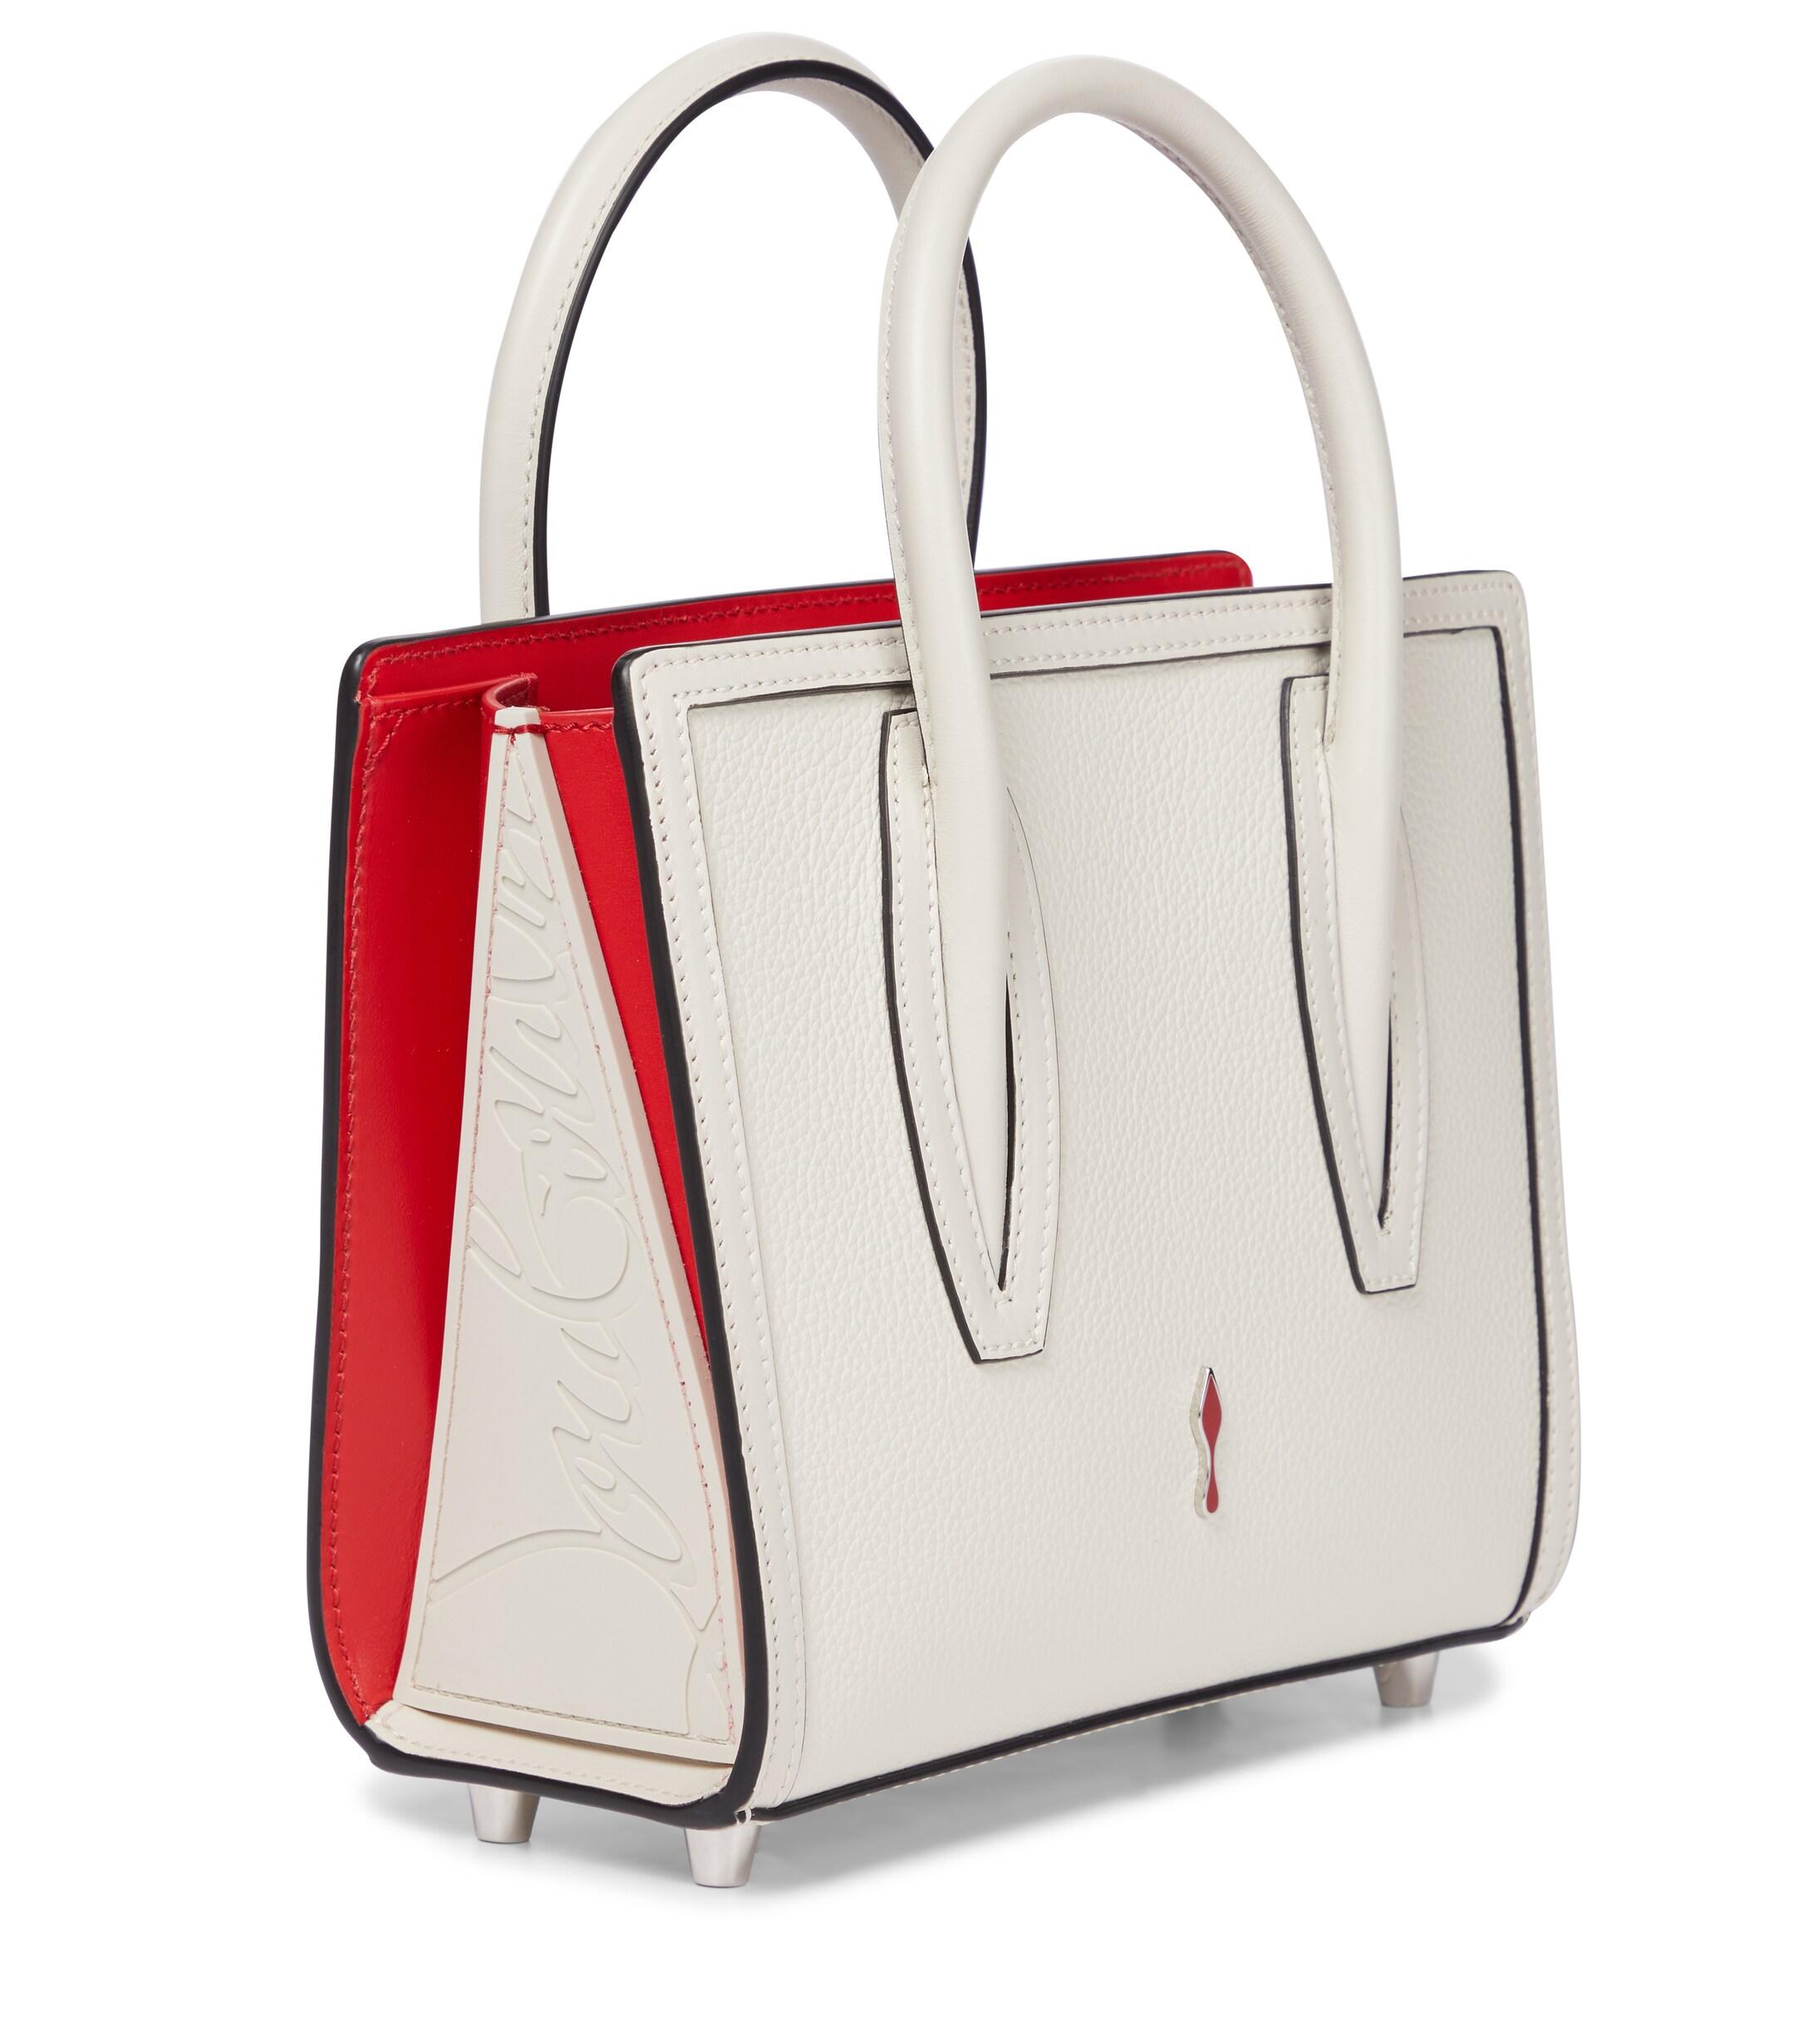 Christian Louboutin Paloma S Mini Embellished Leather Tote in 